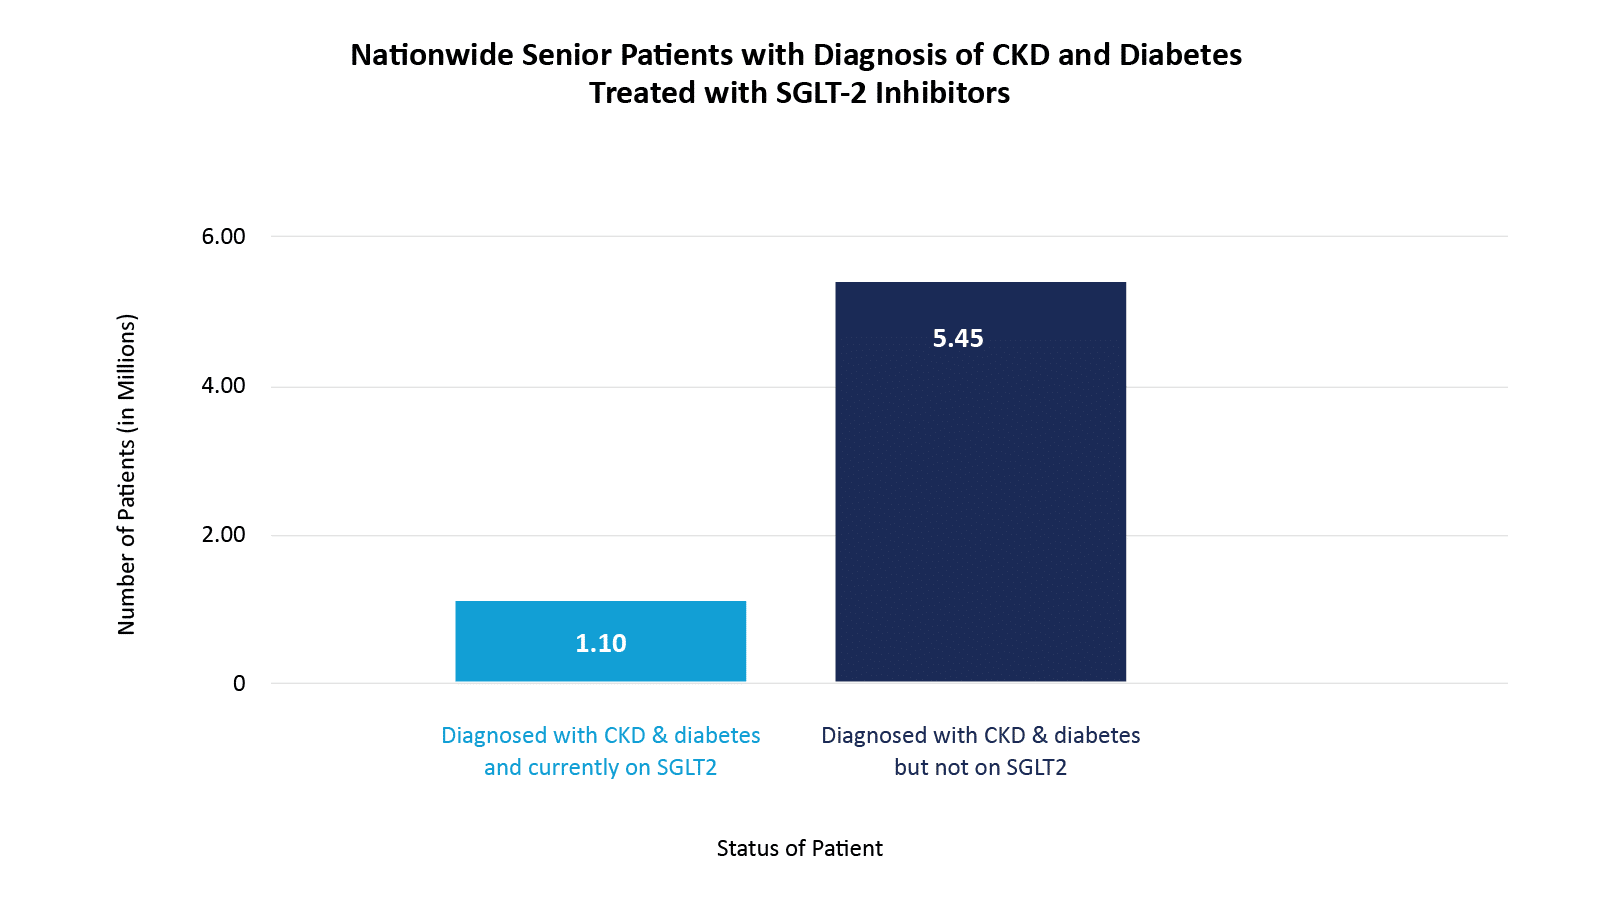 Nationwide Senior Patients with Diagnosis of CKD and Diabetes Treated with SGLT-2 Inhibitors